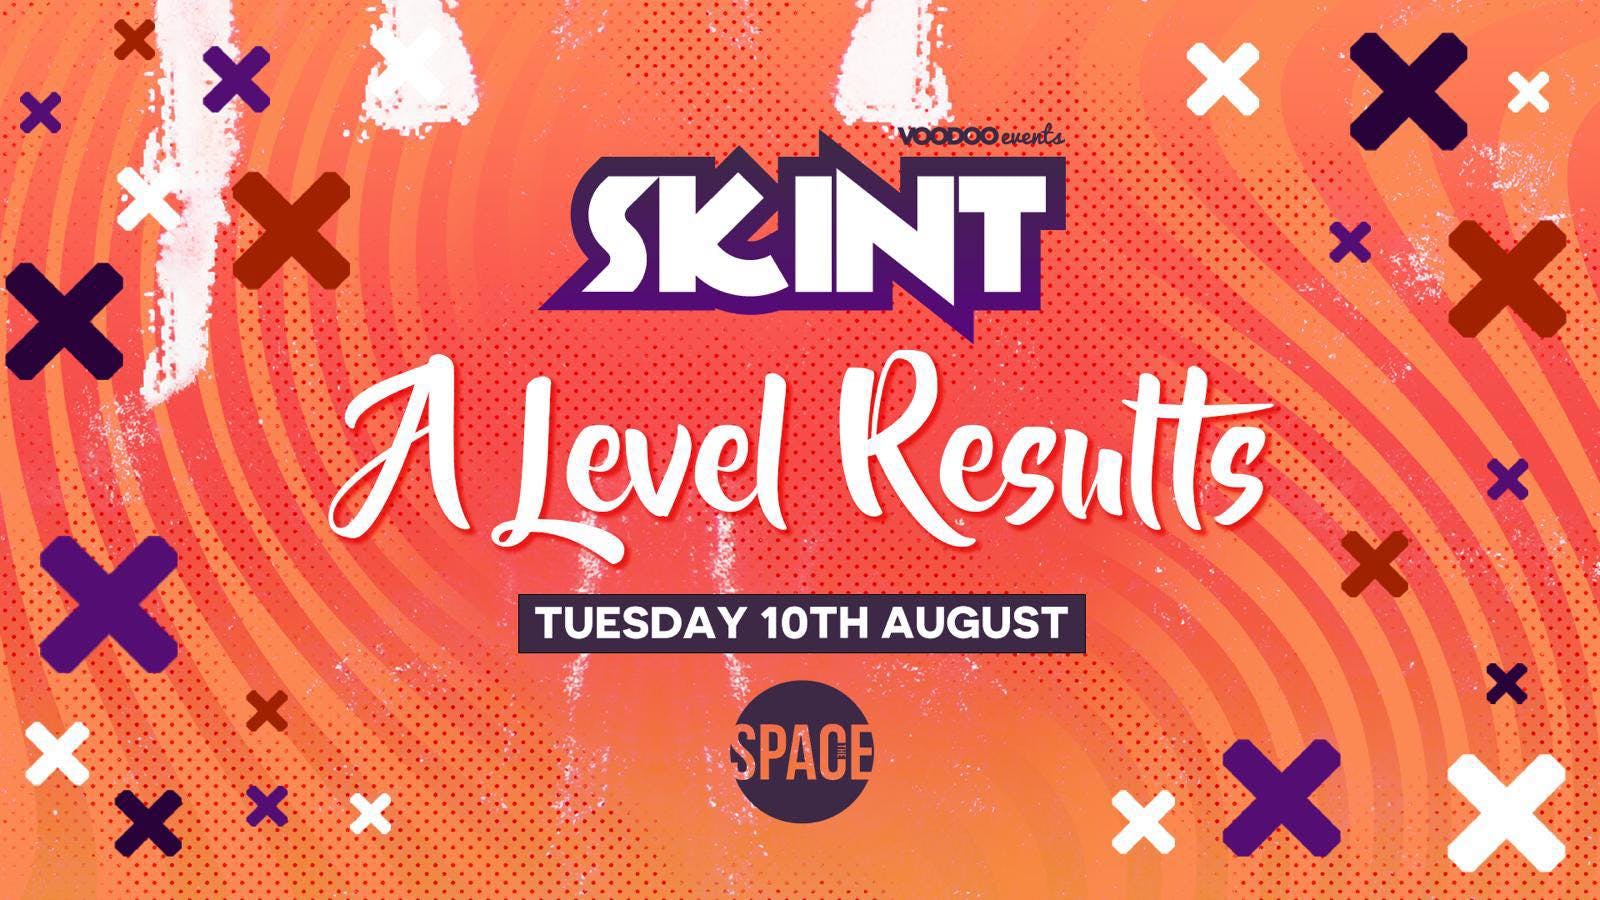 SKINT A Level Result Party 10.08.21